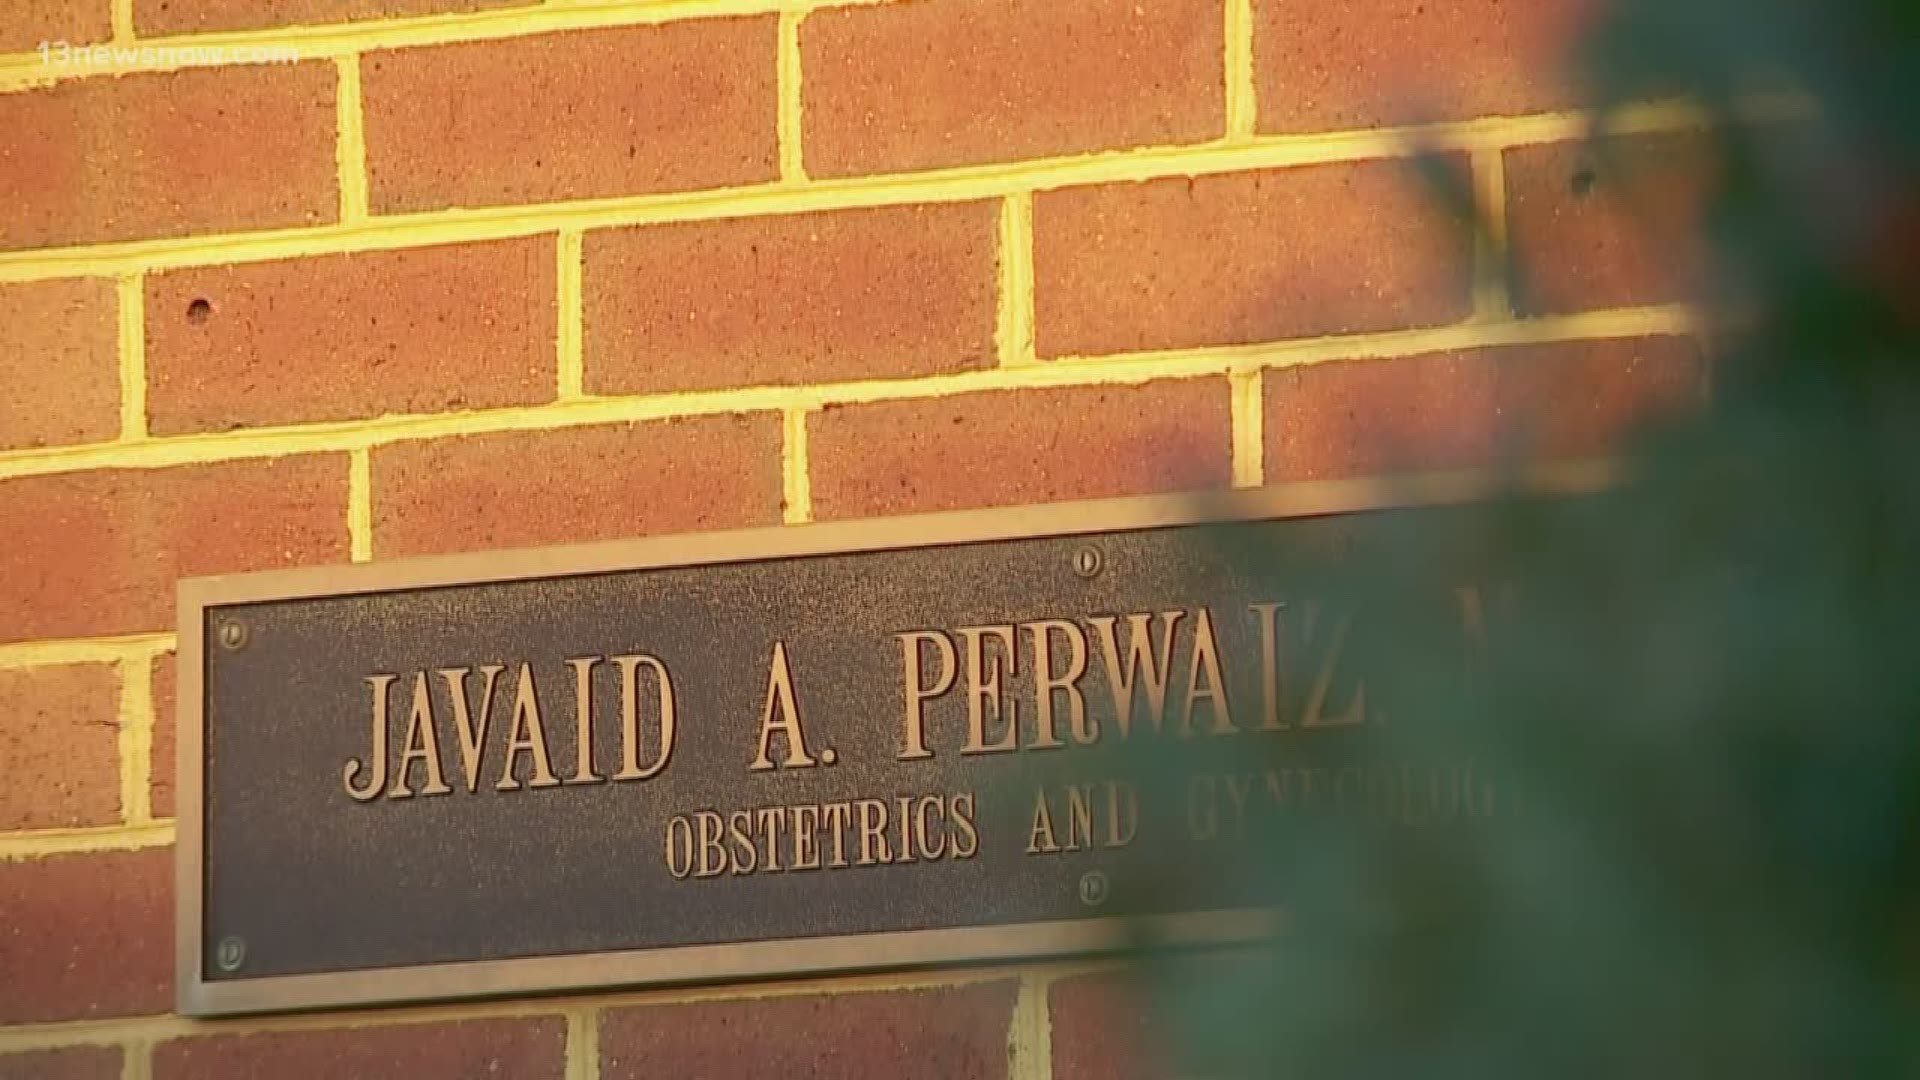 Javaid Perwaiz was denied bond by a judge. 13News Now Allison Bazzle has more on the defense's case and how Perwaiz tried to get out of jail pending his trial.